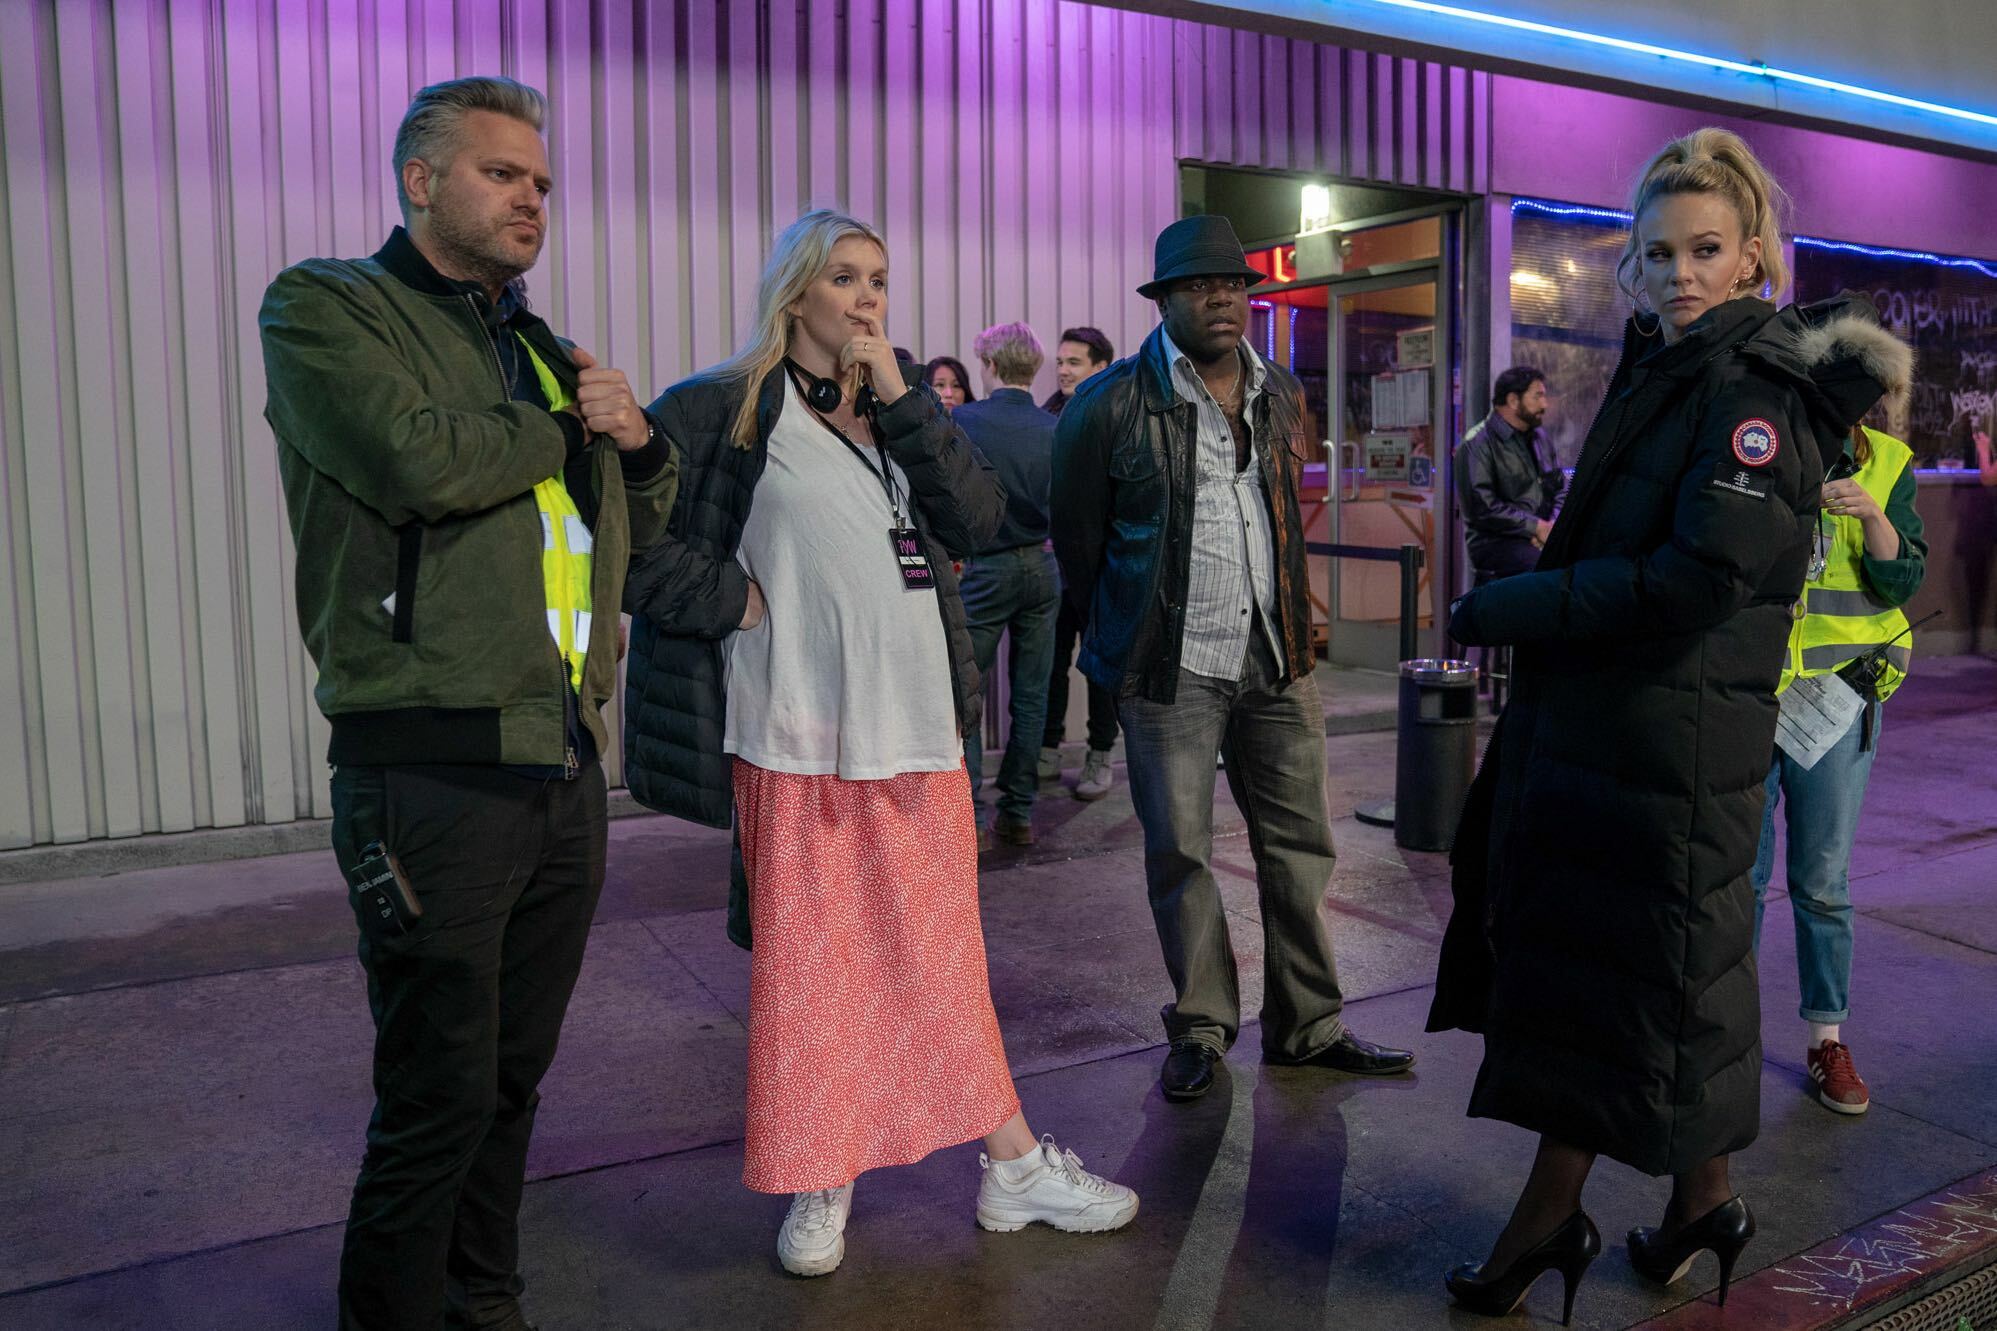 From left, director of photography Benjamin Kracun, writer/director Emerald Fennell, actor Sam Richardson, and actor Carey Mulligan on the set of 